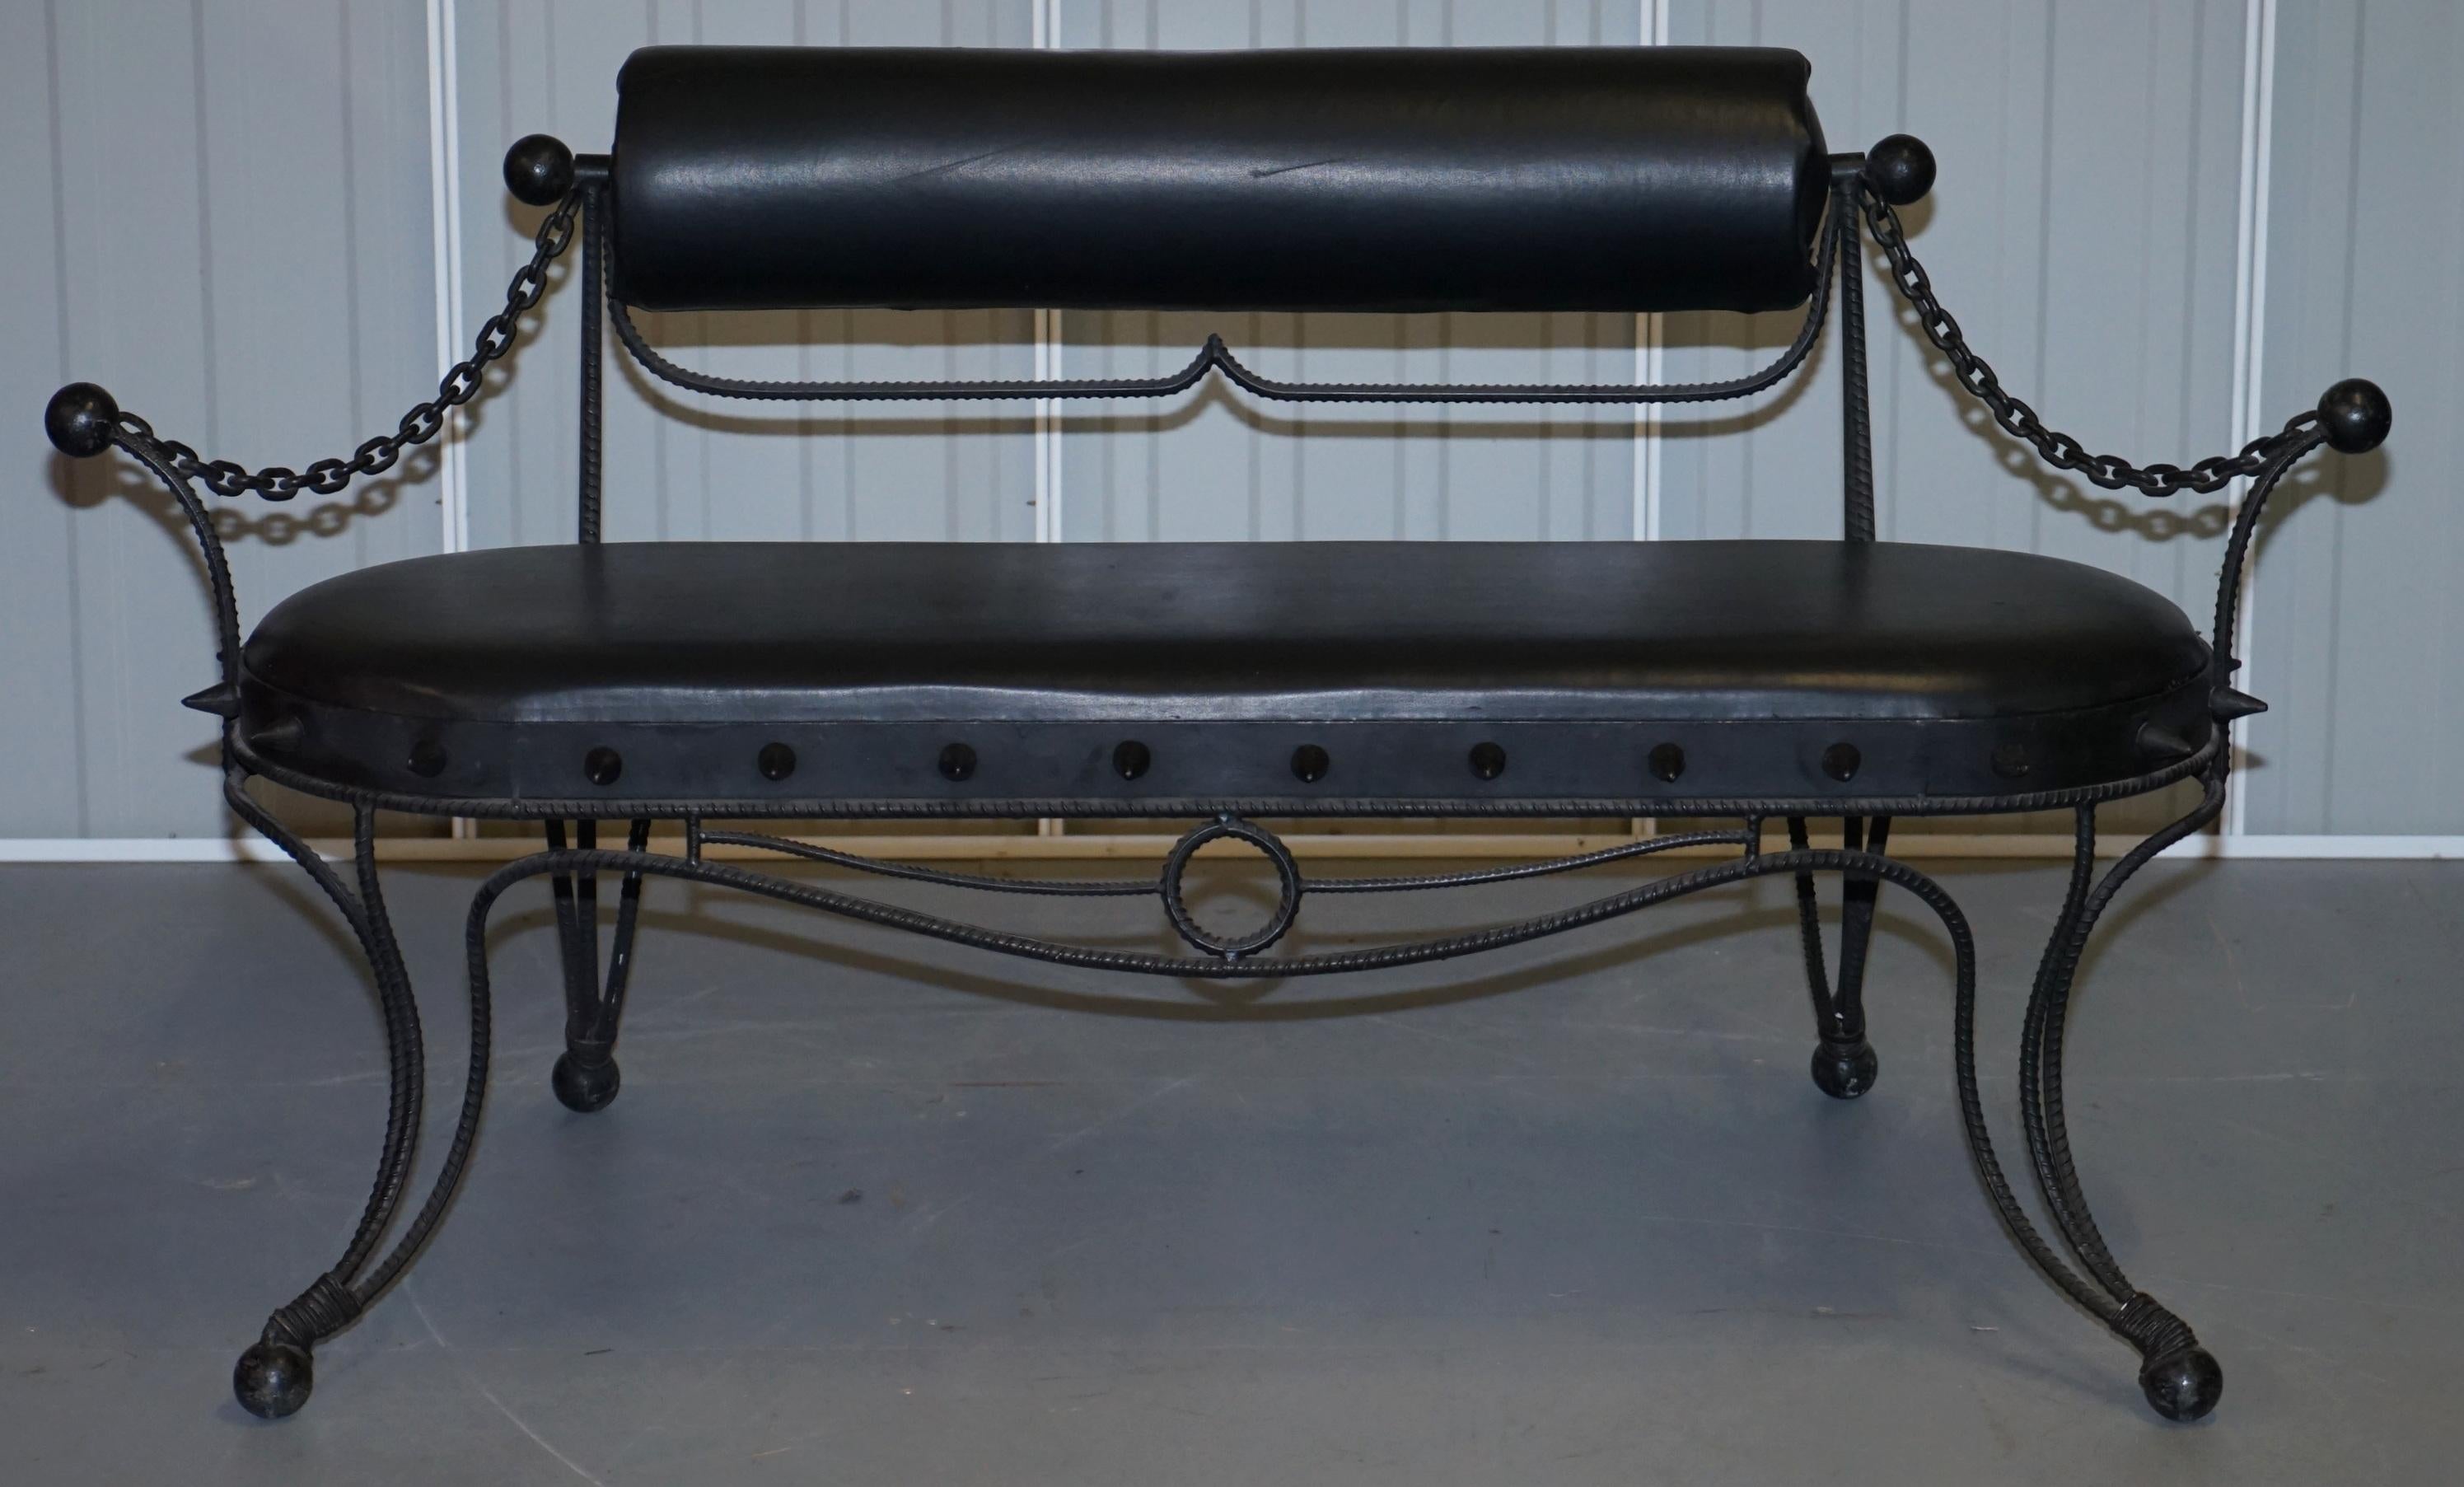 We are delighted to offer for sale this rather interesting metal workers sexy Gothic dungeon bench

Well, where to begin, what an interesting piece…. Umm… it looks like it came from a rather adult looking film, something with a dungeon scene maybe.